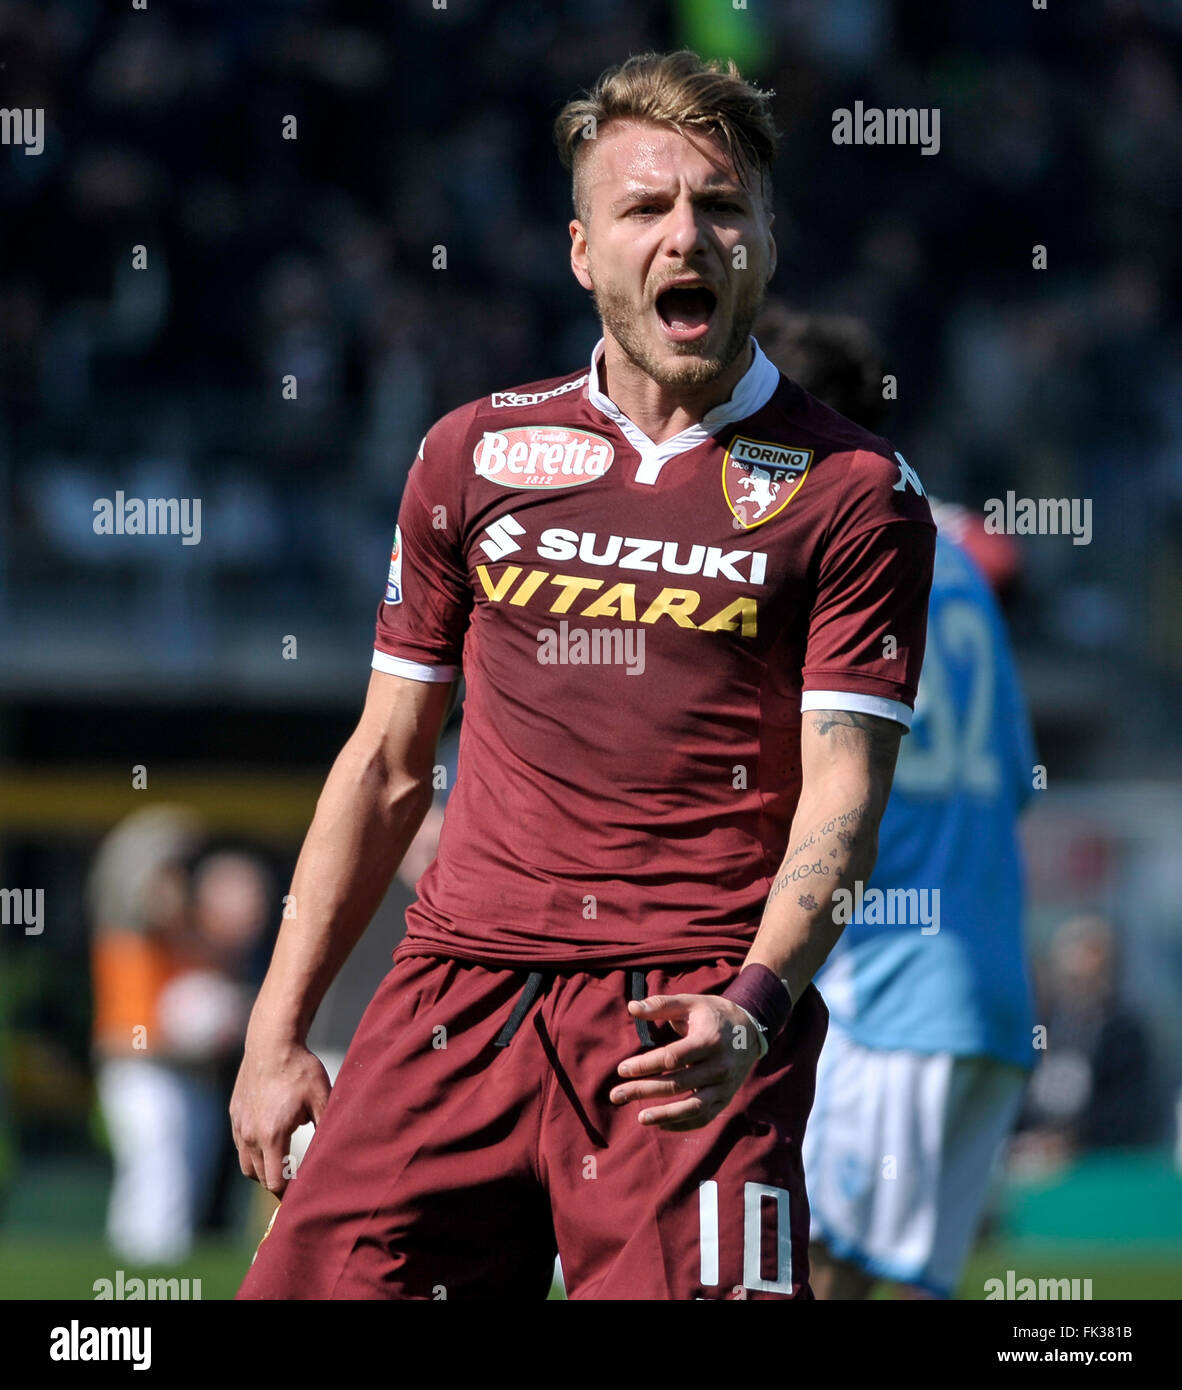 Ciro Immobile is disappointed after missing a chance during the Serie A football match between Torino FC and SS Lazio. The fianl result is 1-1. (Photo by Nicolò Campo/Pacific Press Stock Photo